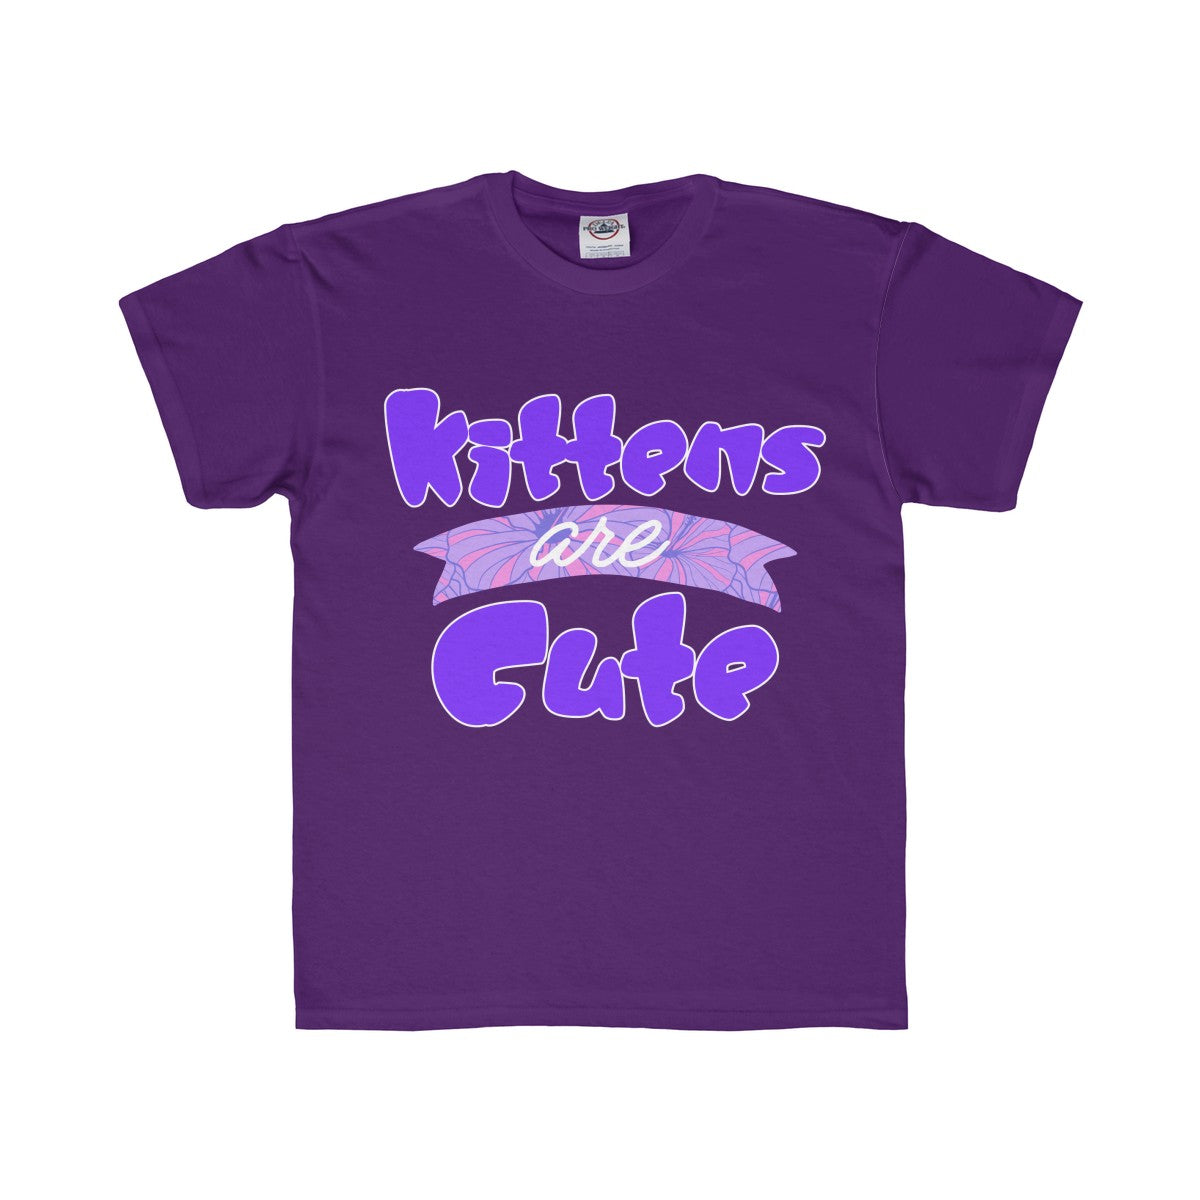 Kittens are Cute Kids Regular Fit Tee-Kids clothes-PureDesignTees